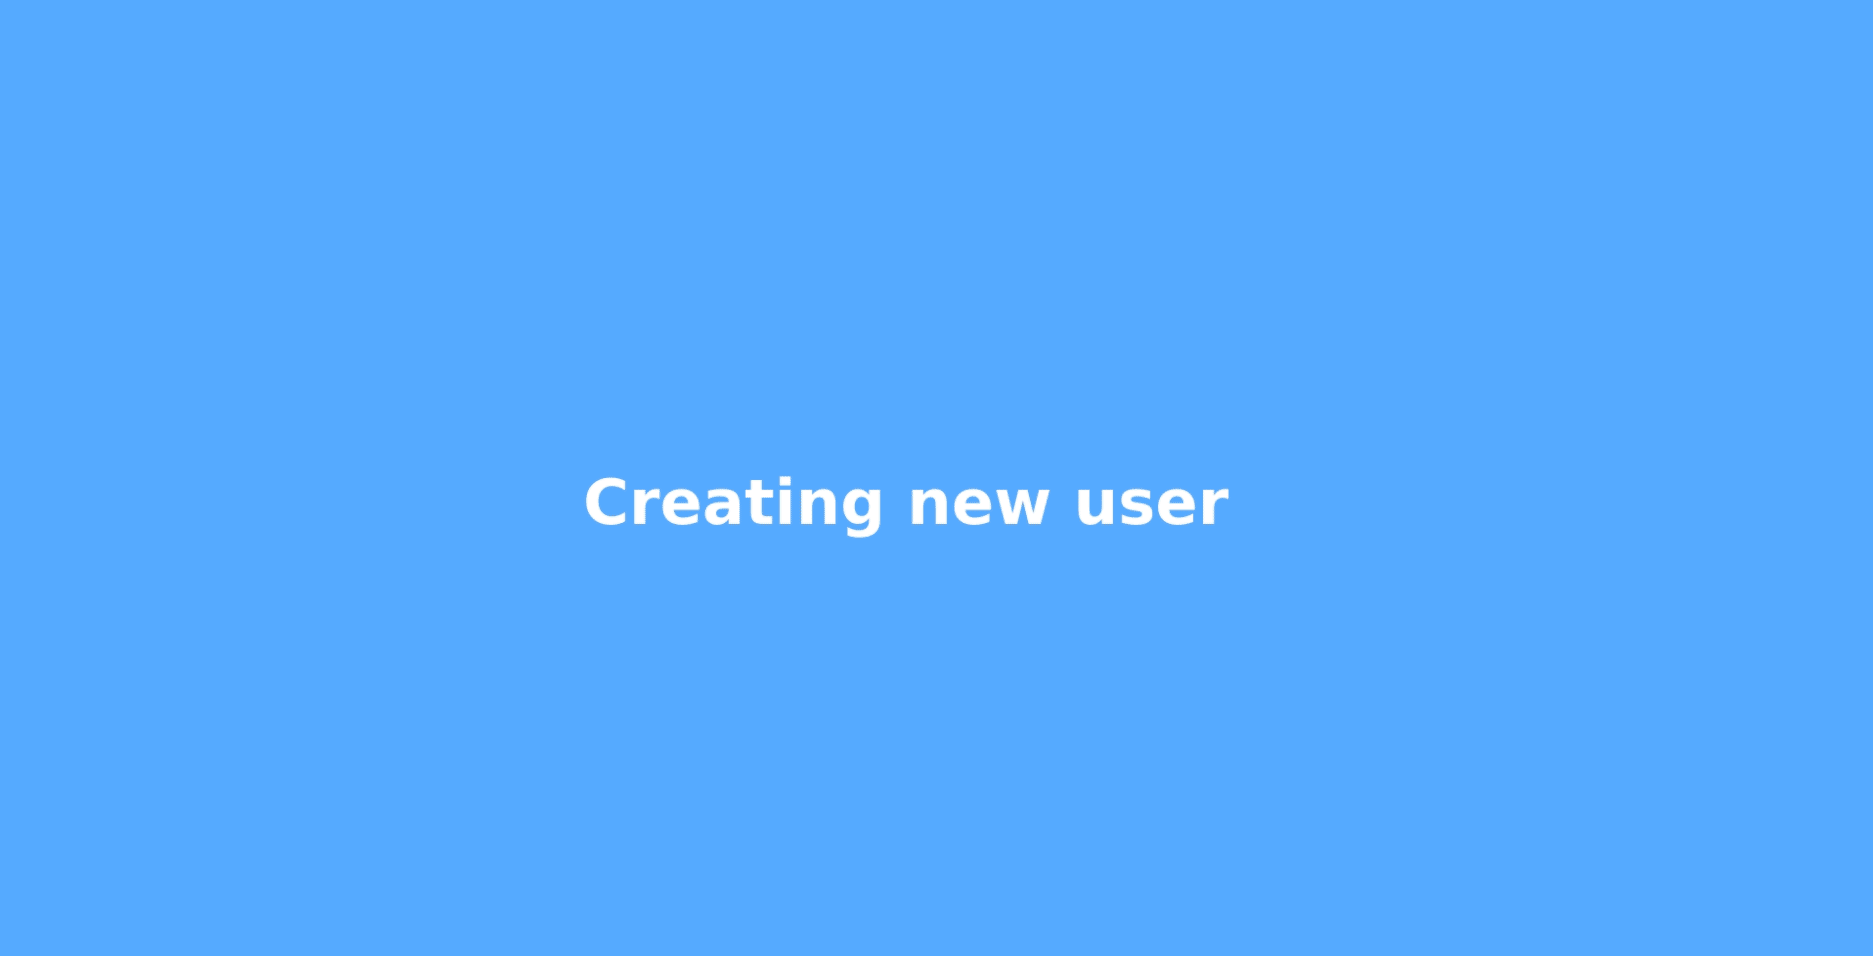 animation showing steps to create new user